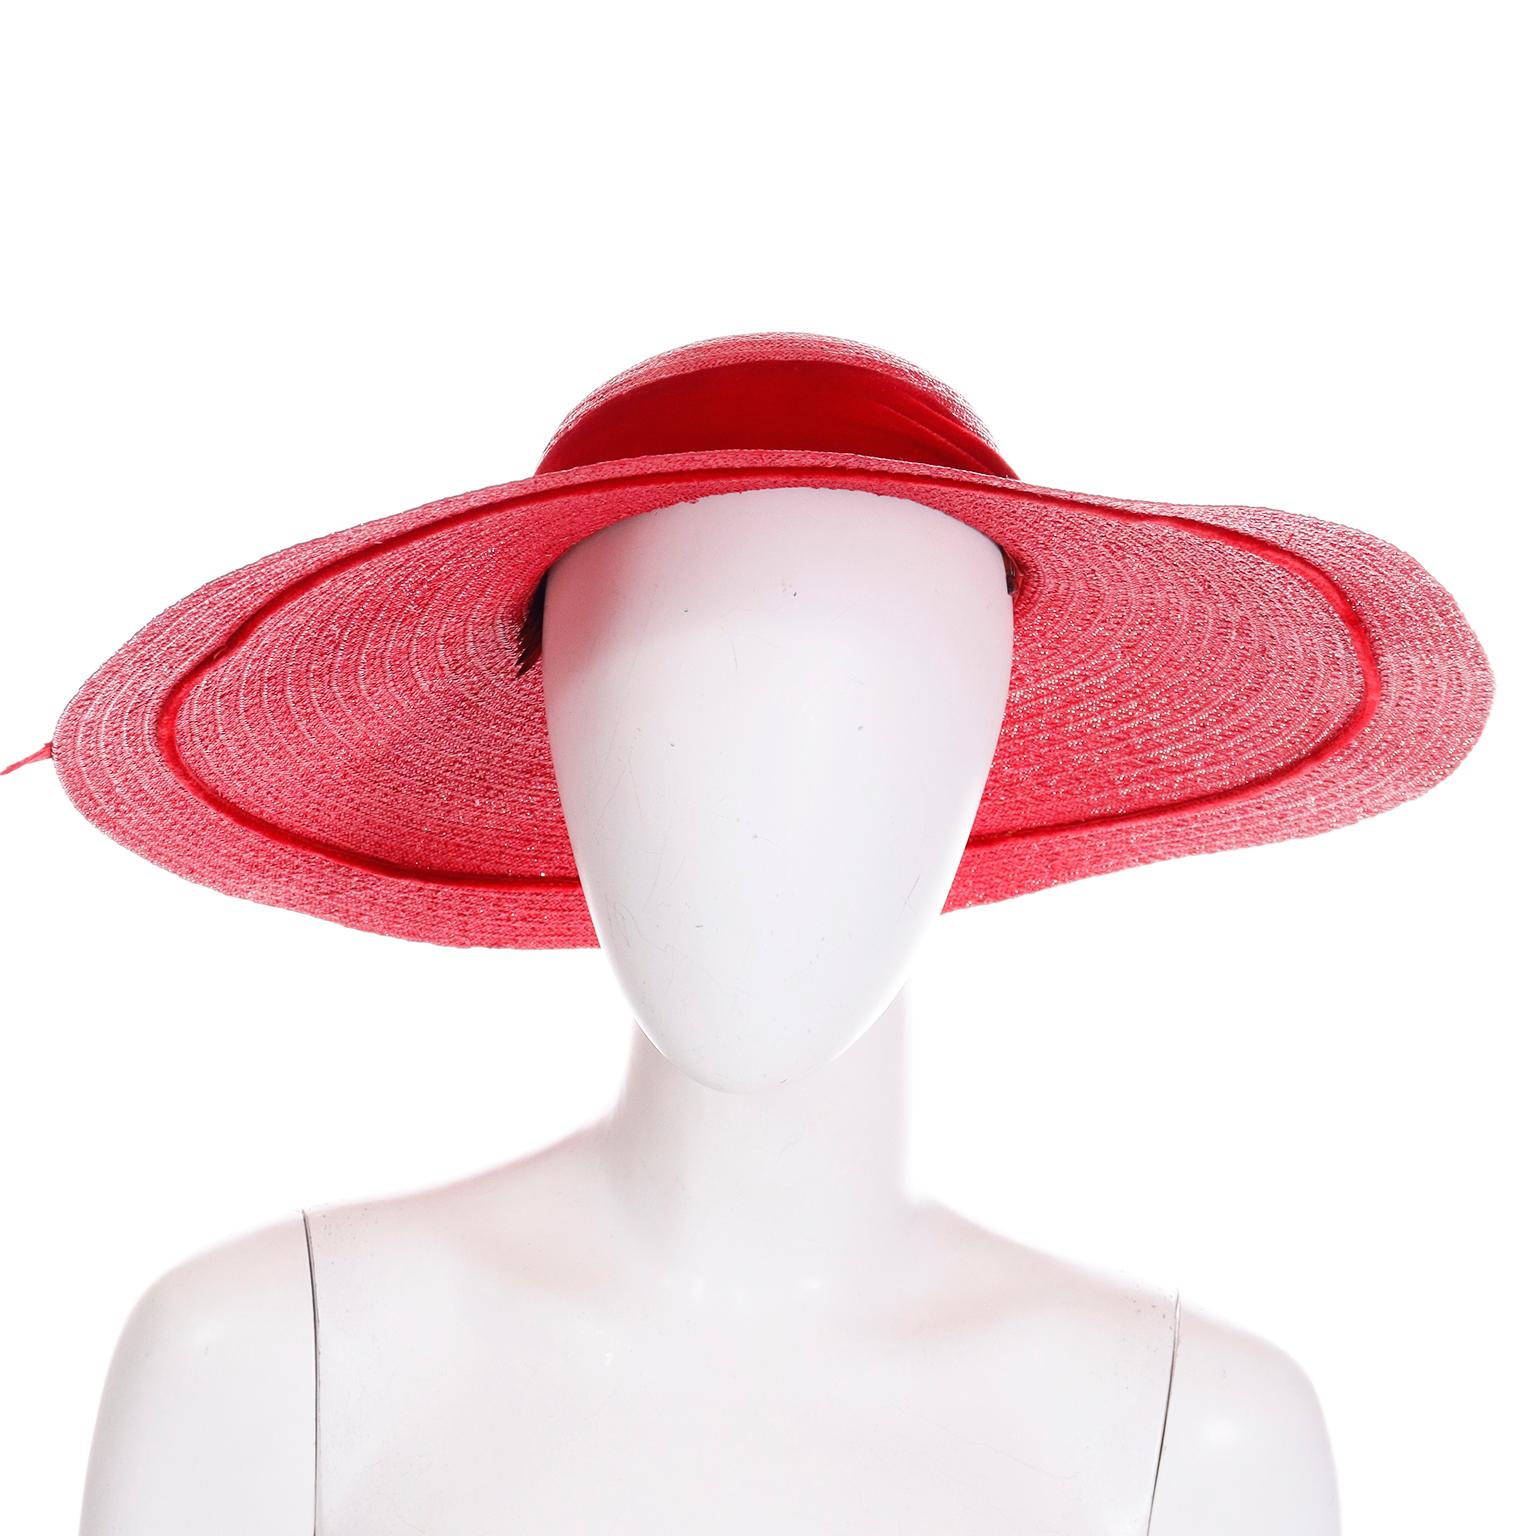 This is a lovely vintage 1940's Mr Leon the Milan King New York wide brim cherry red straw hat with a red velvet ribbon and bow. This hat has two labels; Mr Leon the Milan King New York and Joseph Magnin. We love the vintage late 1930's and early